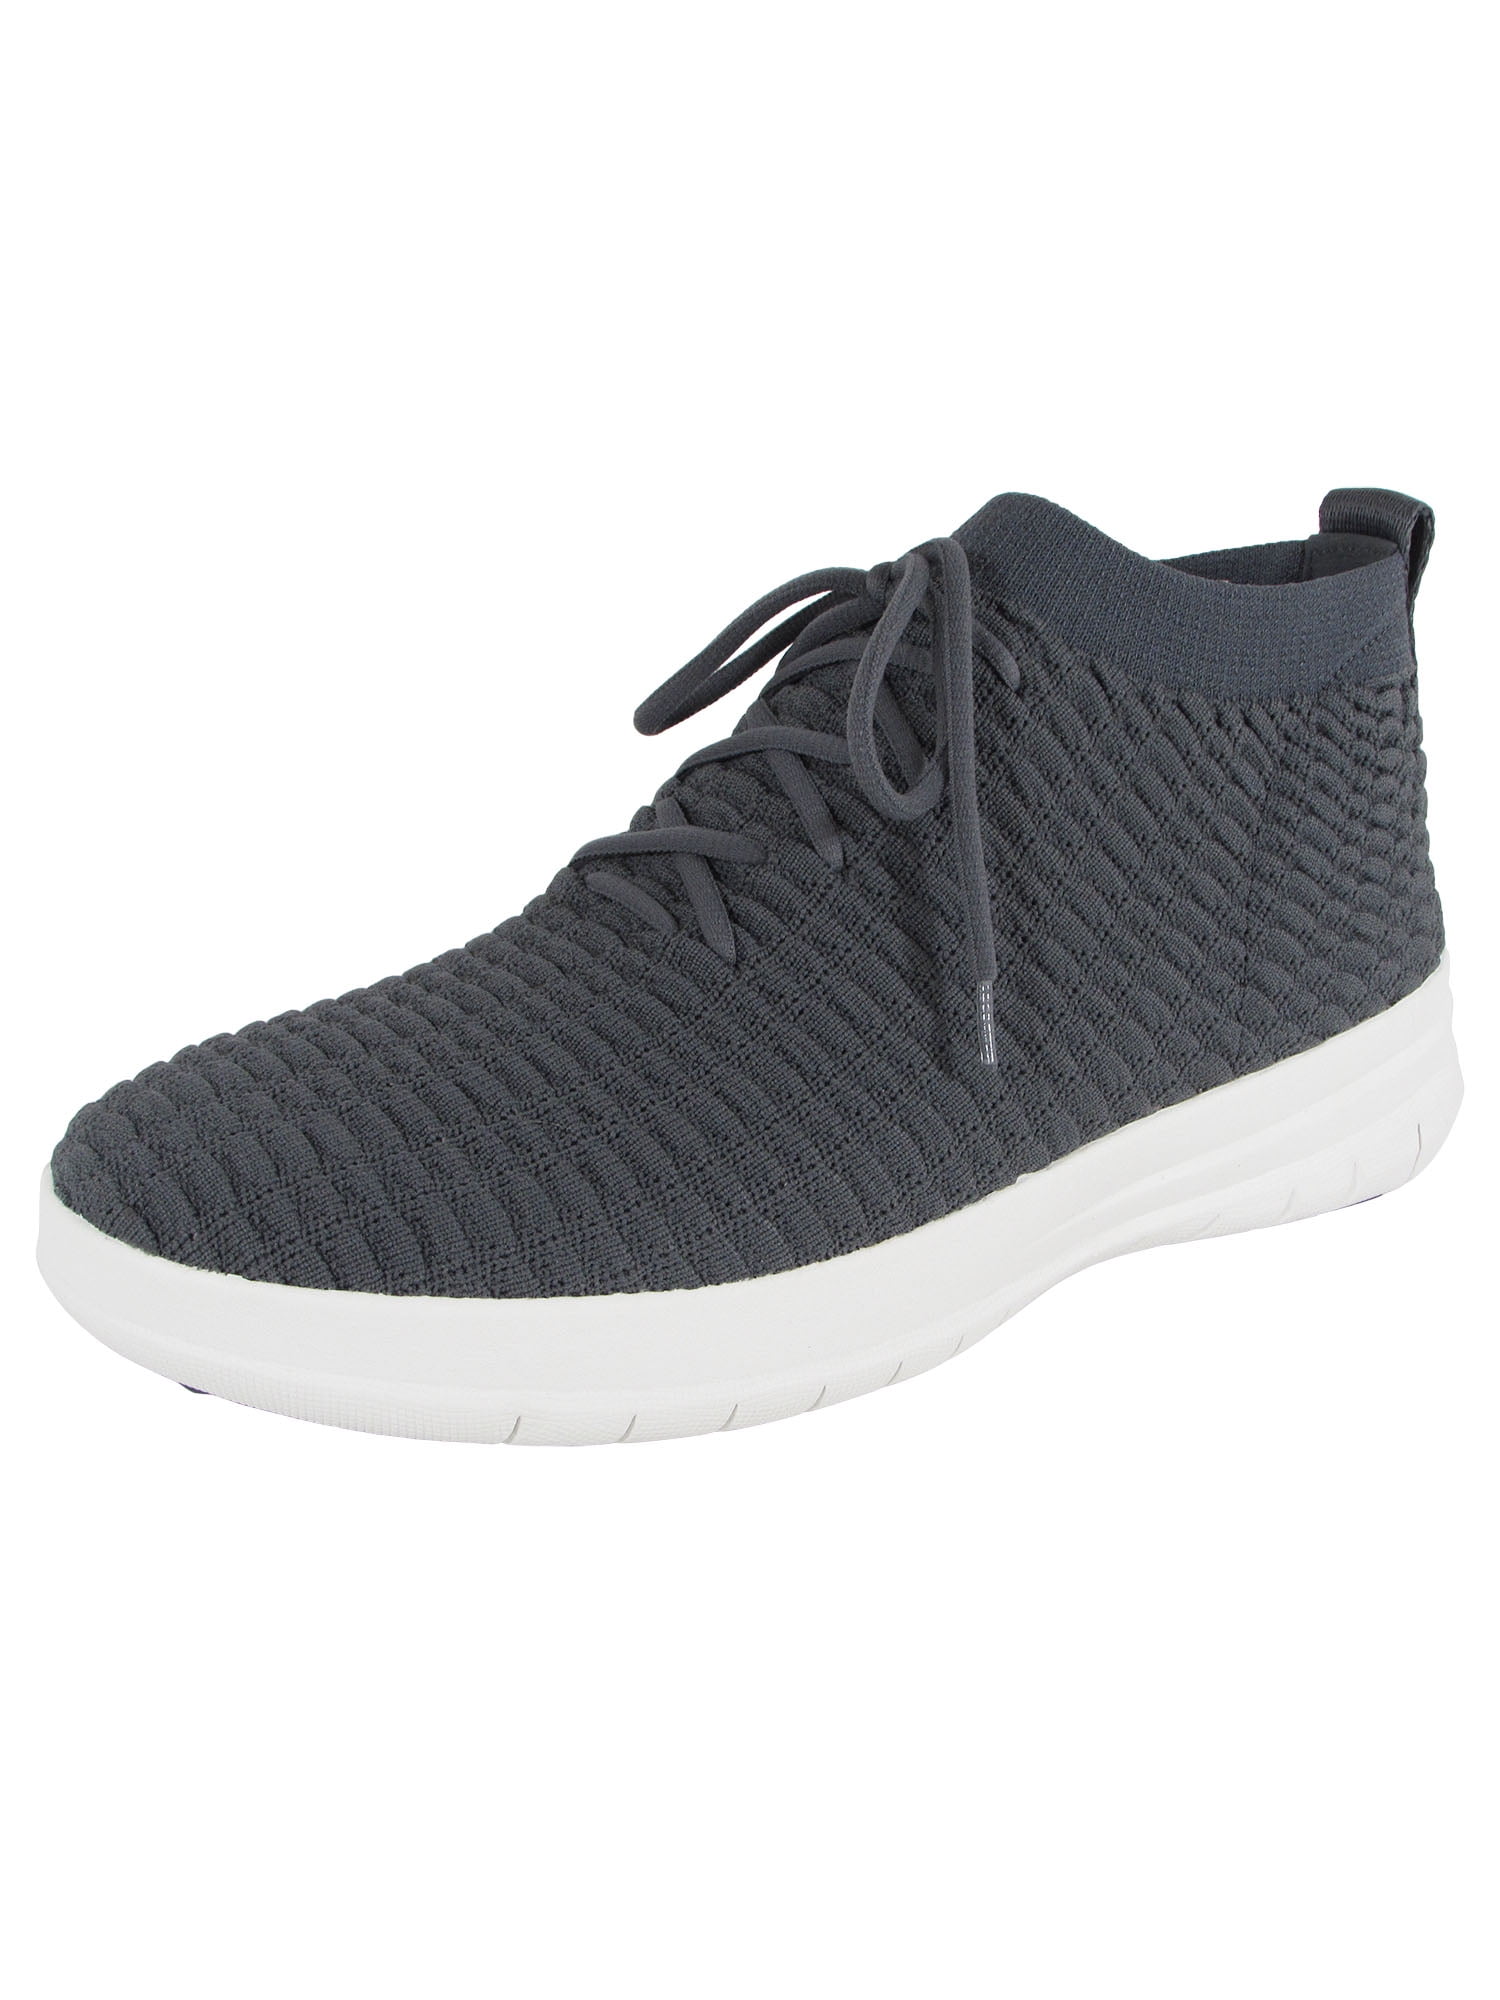 FitFlop - Fitflop Mens Uberknit Slip On Waffle Knit High Top Shoes ...